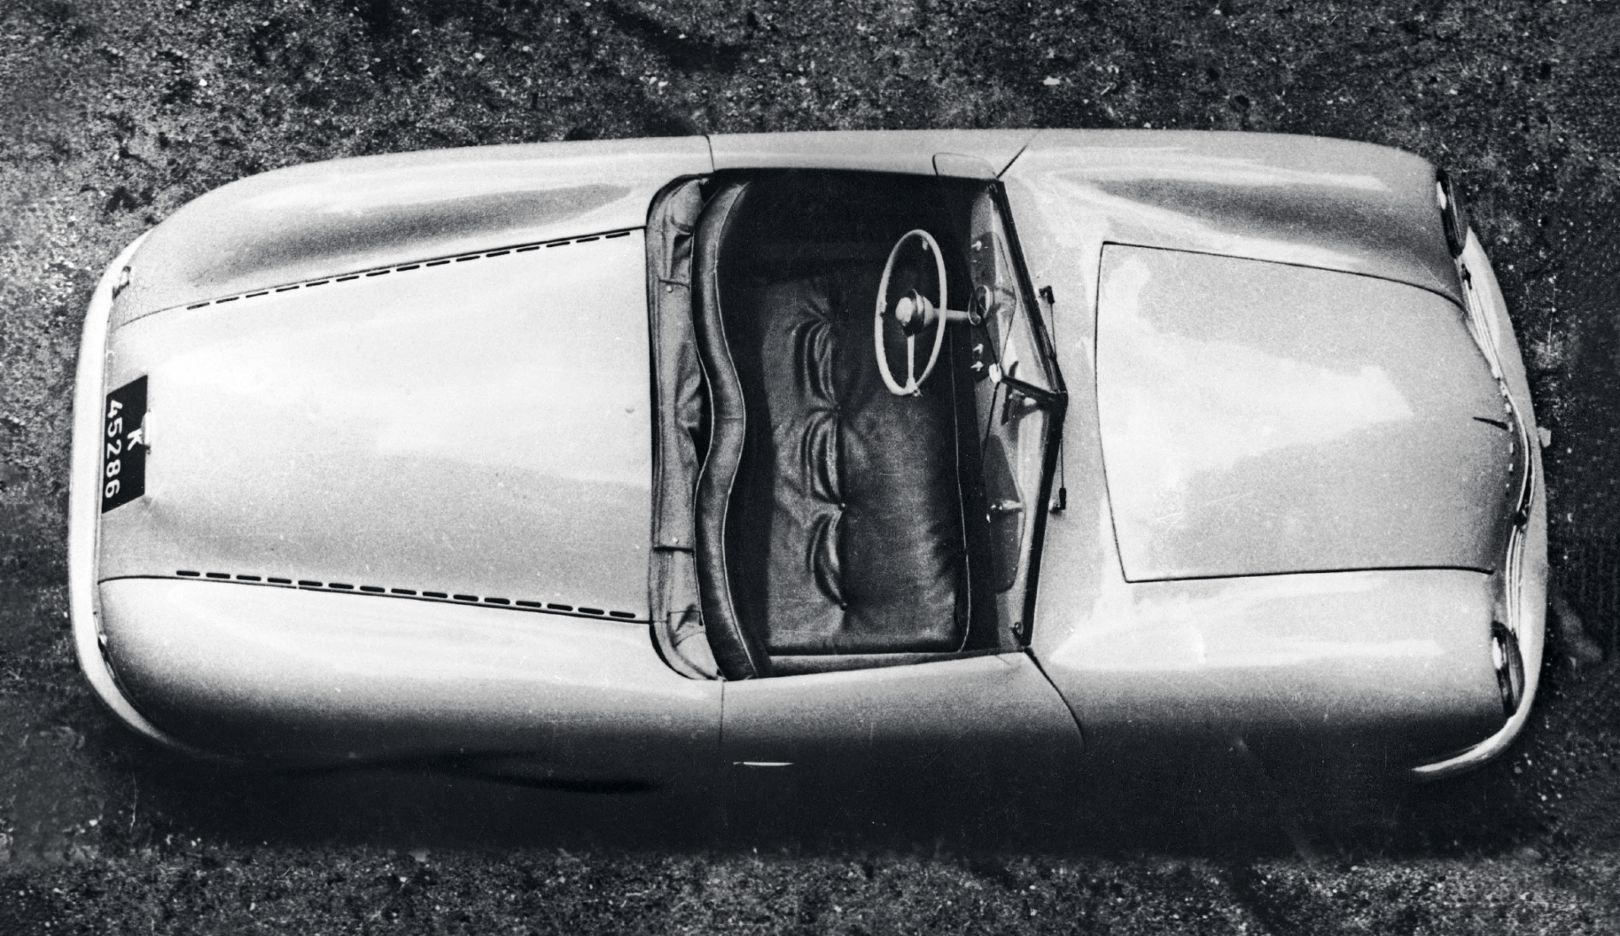 The 356 “No. 1” Roadster, 1948